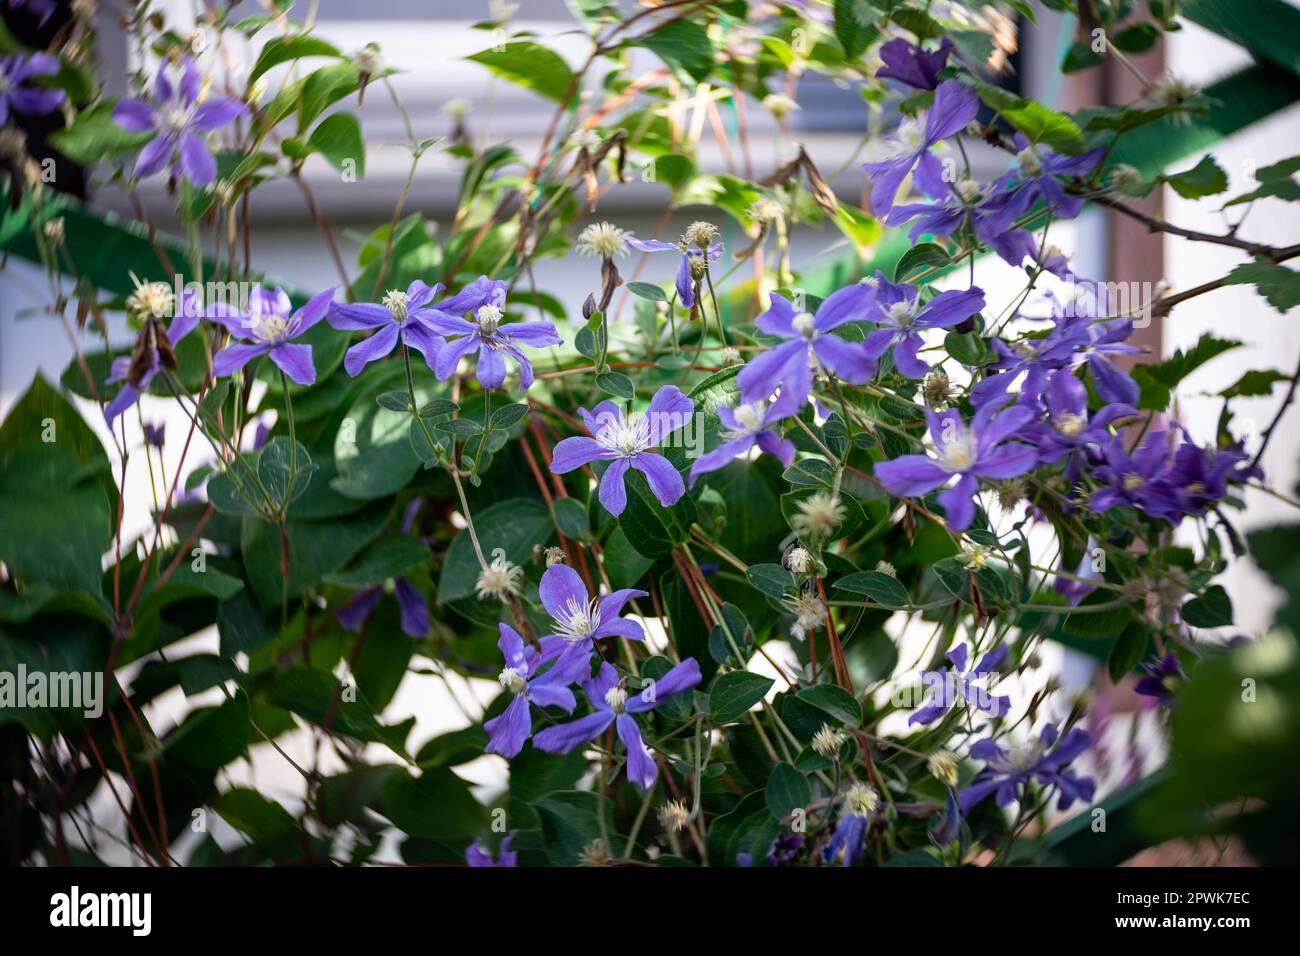 Flowers of Clematis viticella. Art lens. Swirl bokeh. Focus on the center. Stock Photo